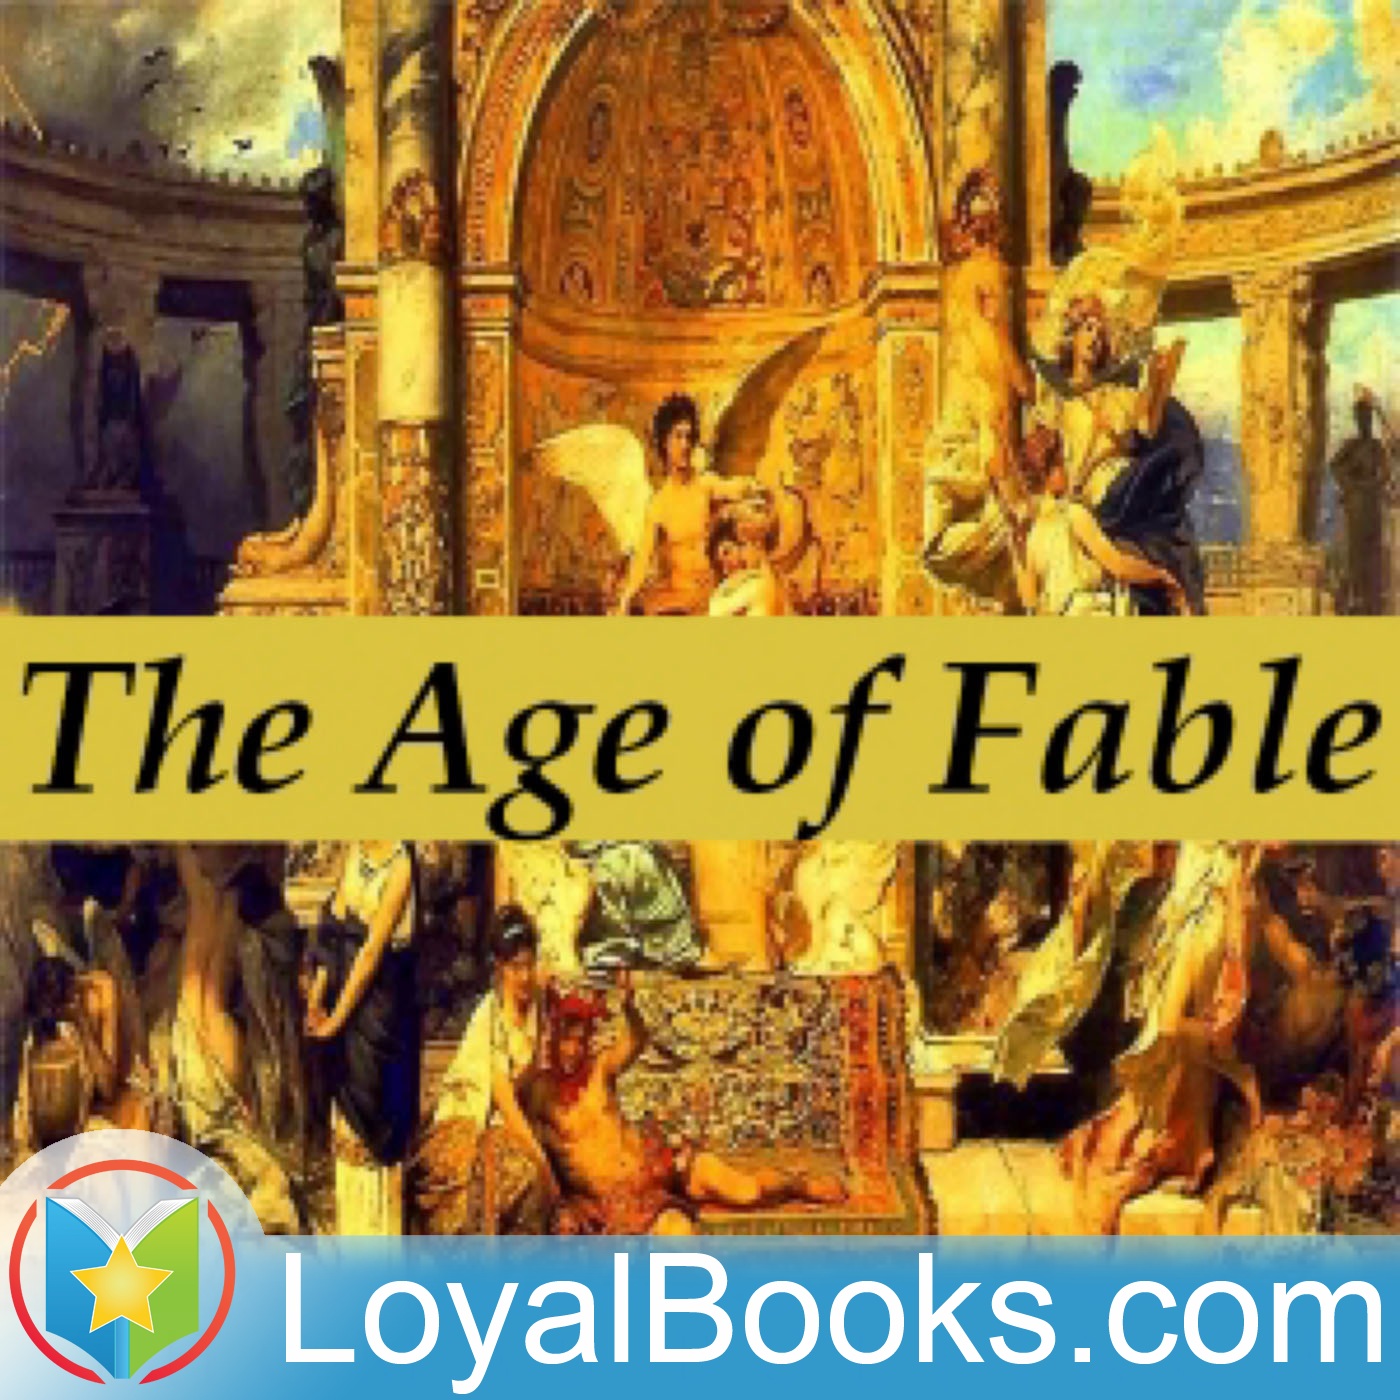 The Age of Fable: Chapter 27